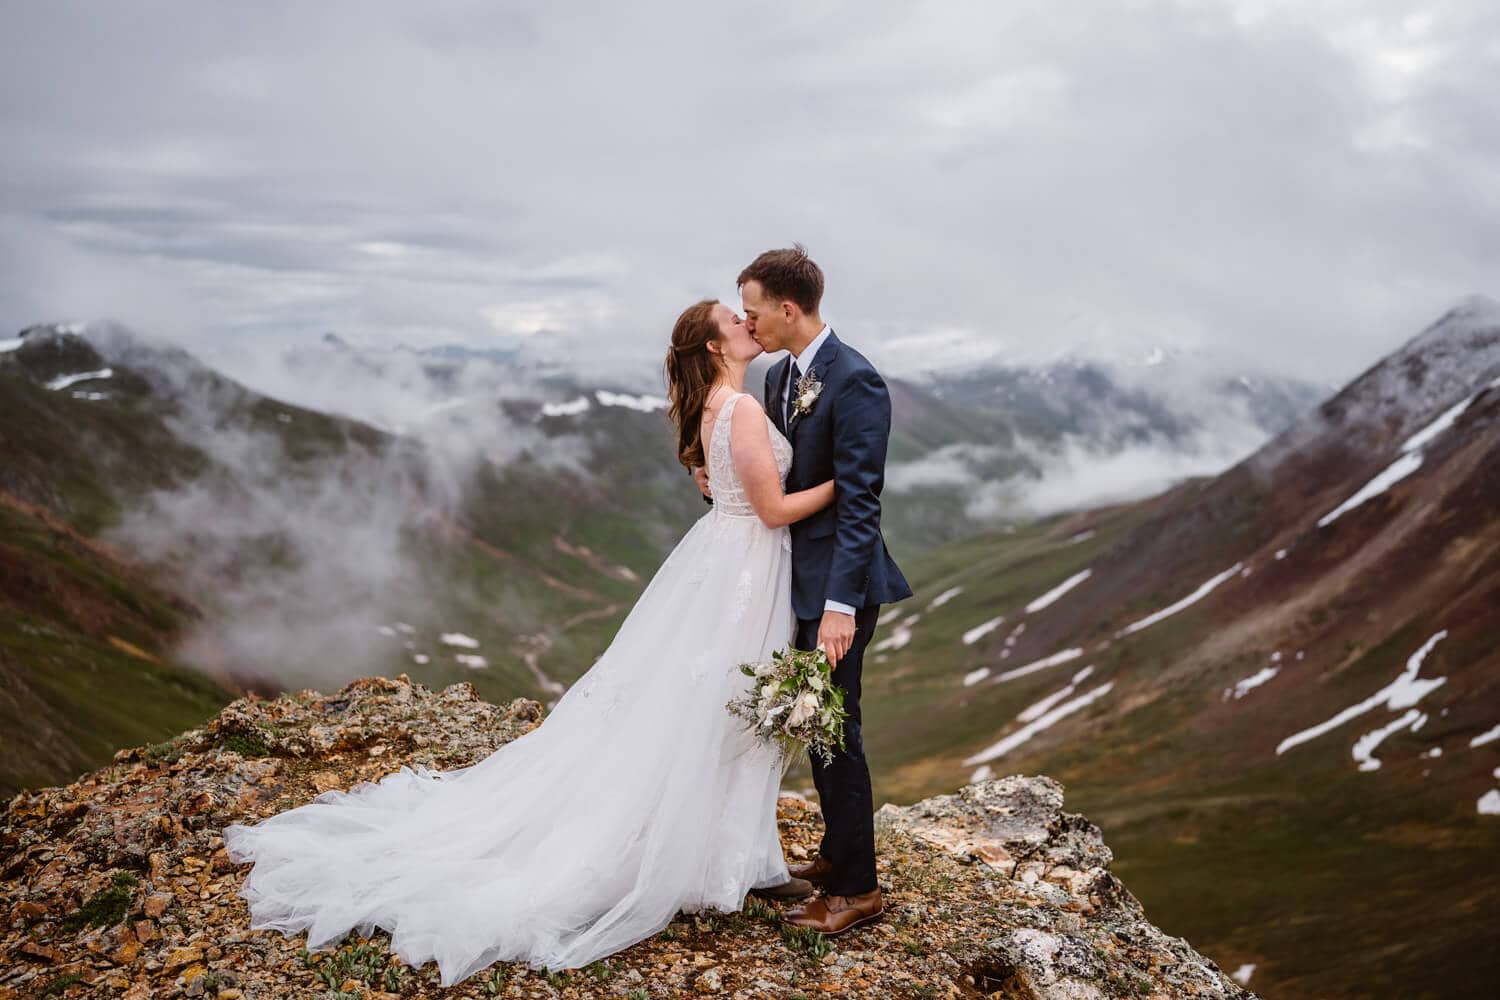 A couple elopement on a mountain pass after their Colorado elopement.